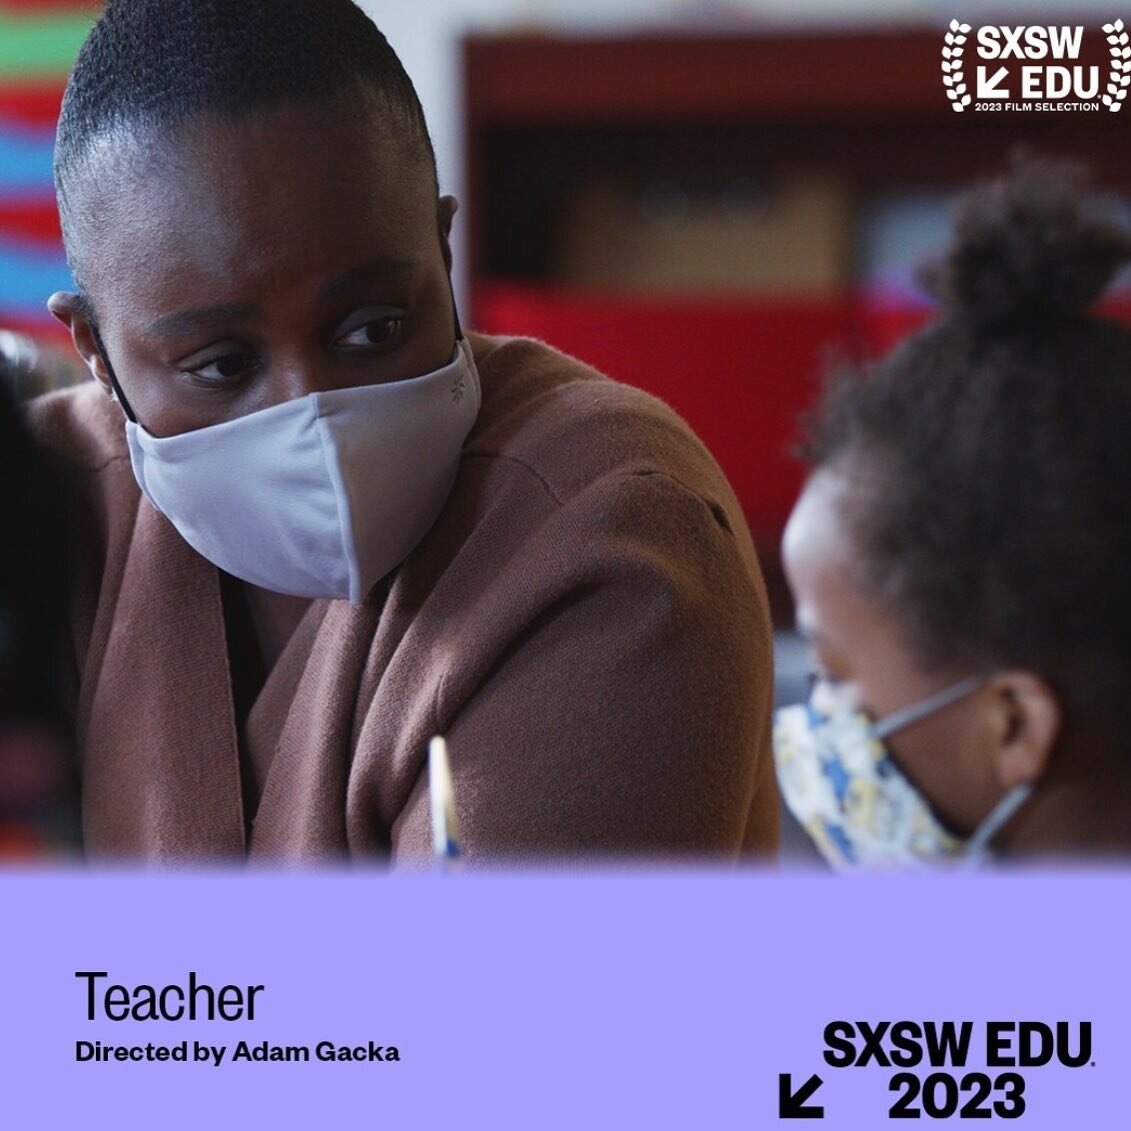 Excited to have our film, Teacher, premiere at @sxswedu in Austin on March 8th! 🎉

#teacher #teachers #cps #chicagofilmmakers #chicago #weloveteachers #equityineducation #documentary